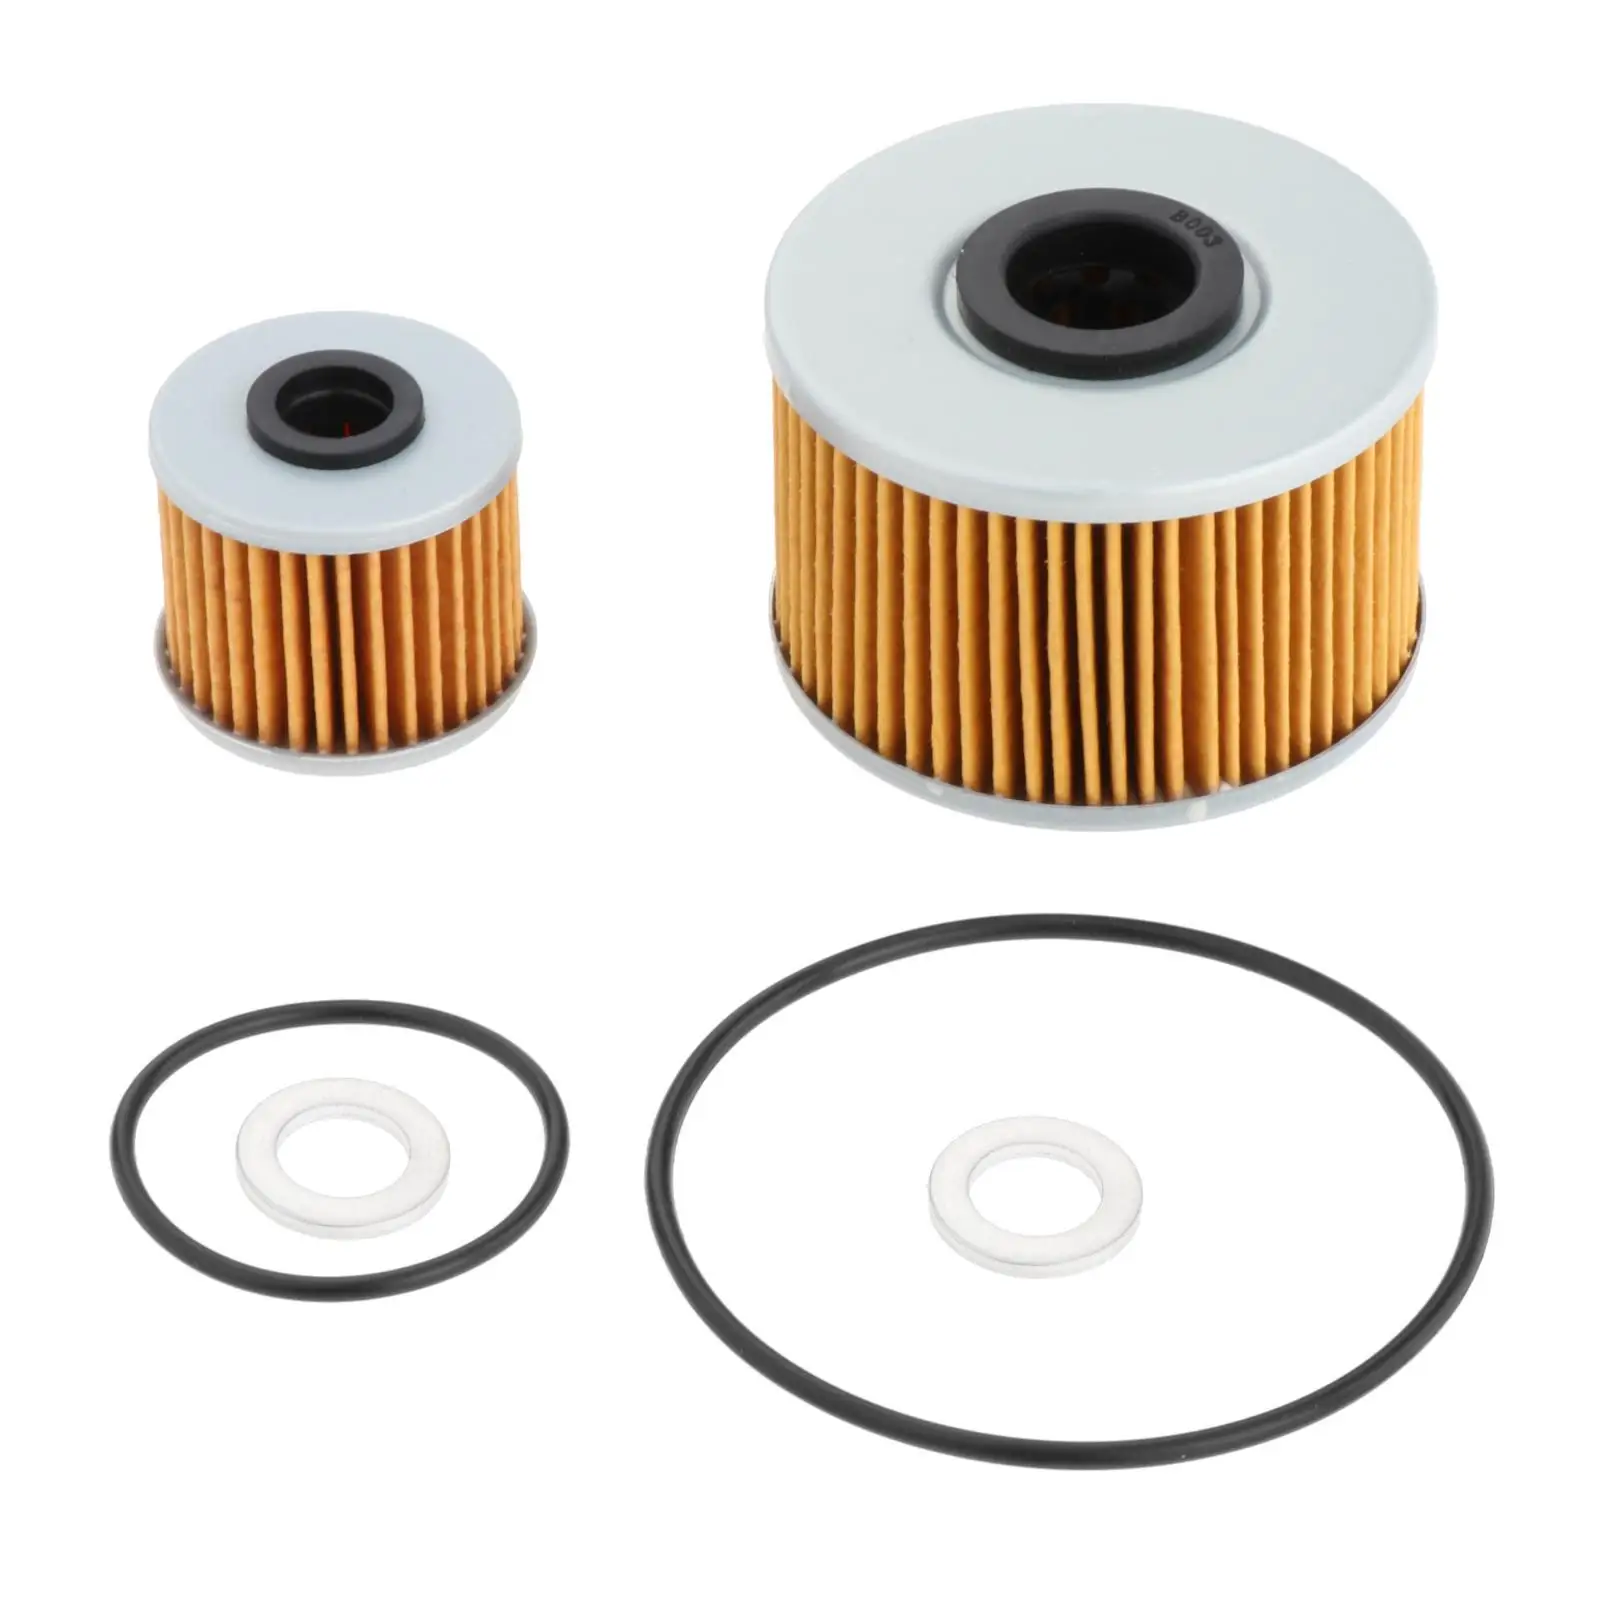 Oil Filter Replace Set 15412HP7A01 91301107000 9410912000 Washers Enegine Parts for 1000 2016+ Ctx700ND Crf1000L Goldwing 1800